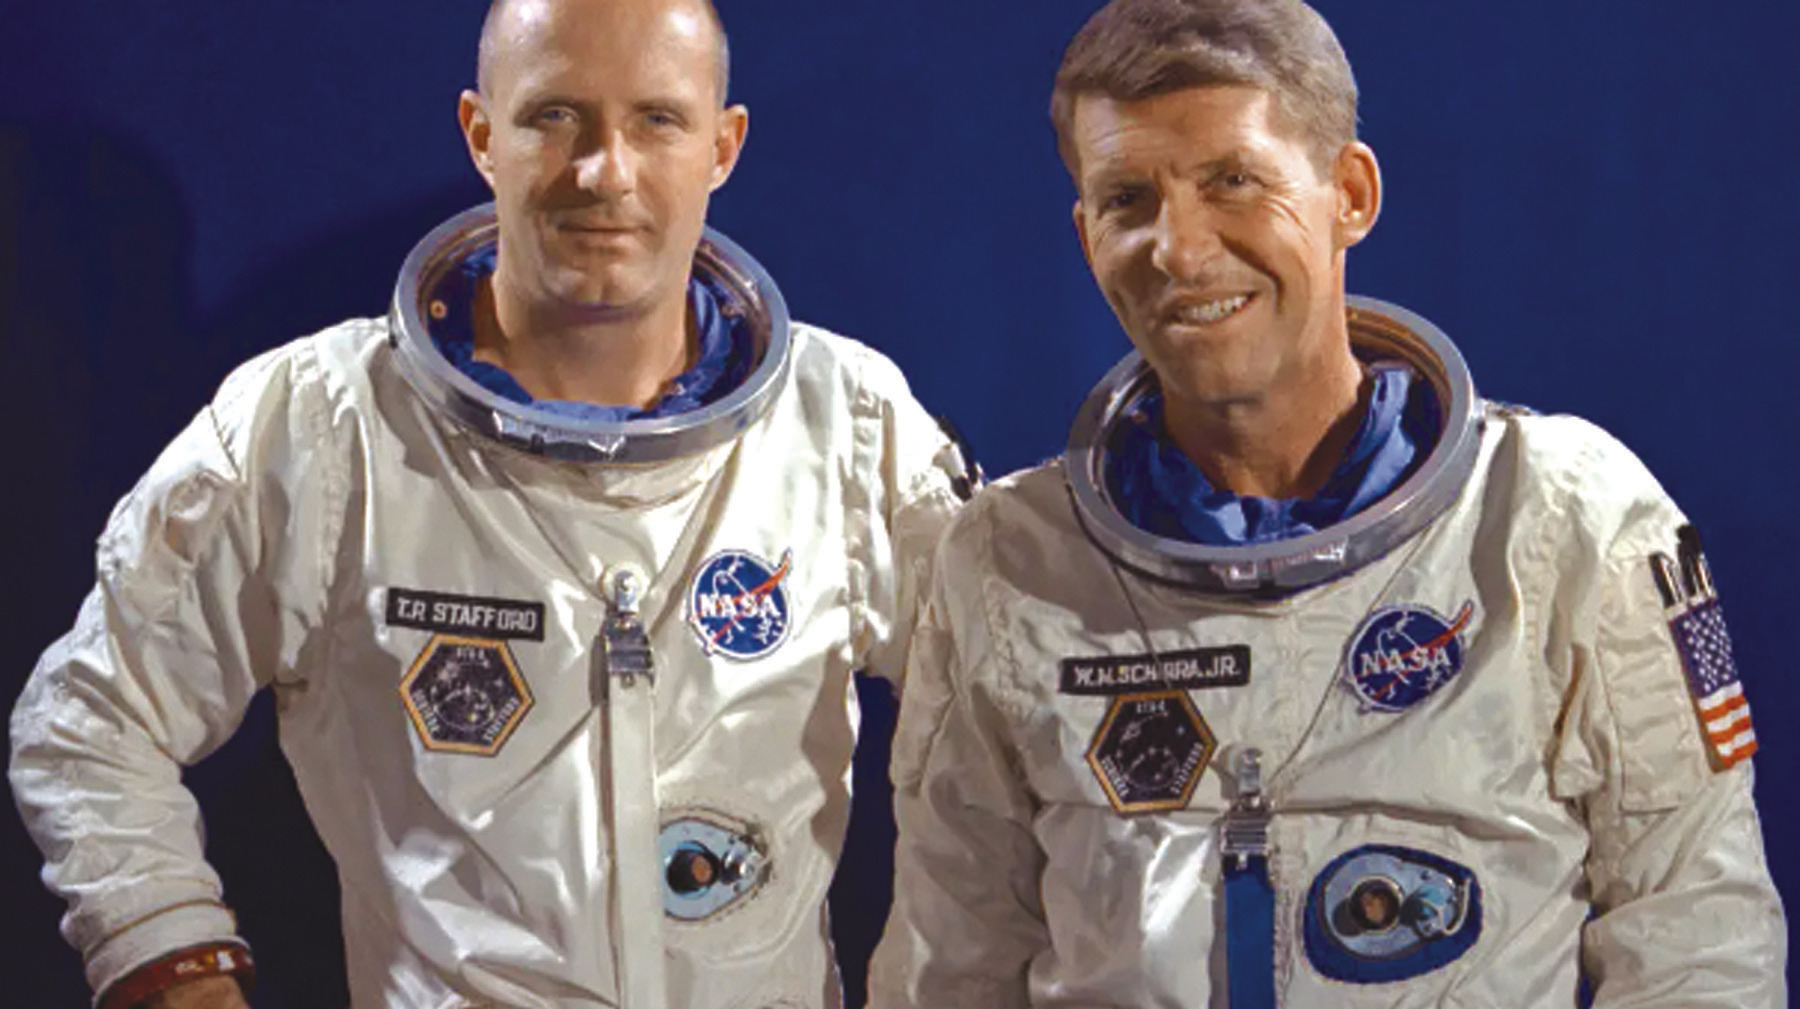 Gen. Tom Stafford, left, is pictured with fellow Gemini 6 crew member Walter M. Schirra Jr. Photo courtesy of NASA